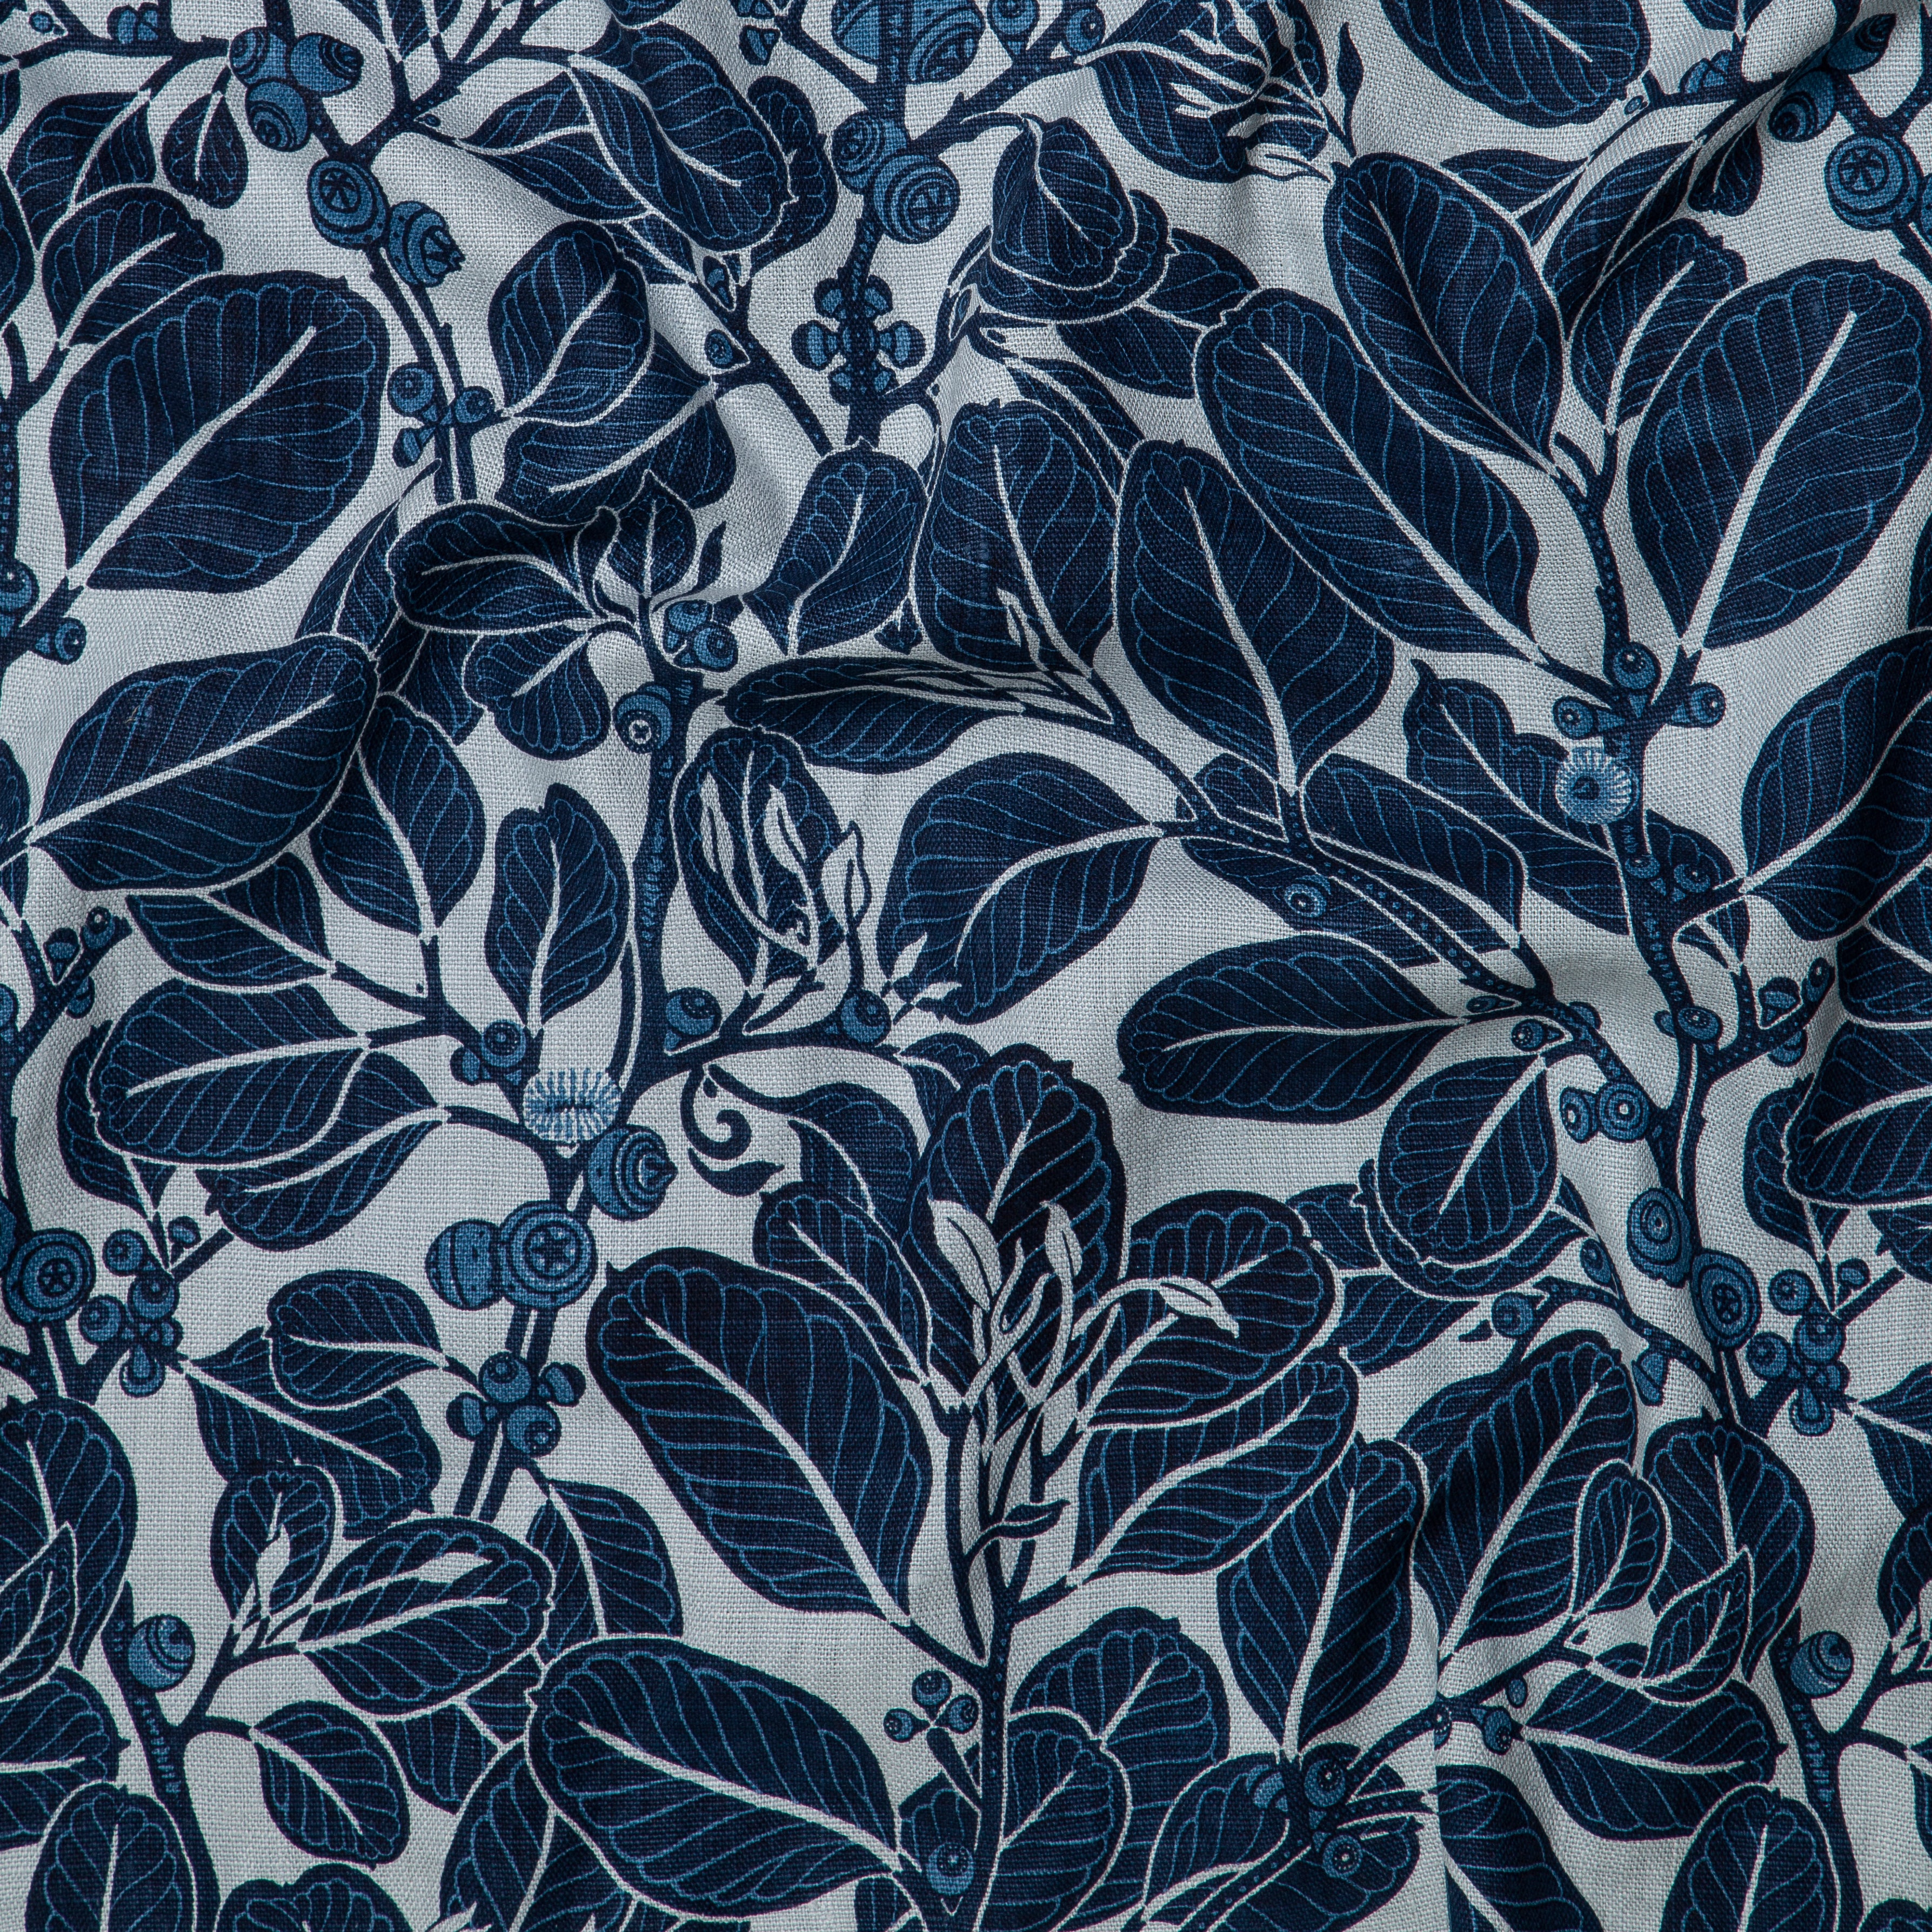 Detail of wallpaper in a dense leaf and stem print in blue-gray on a white field.